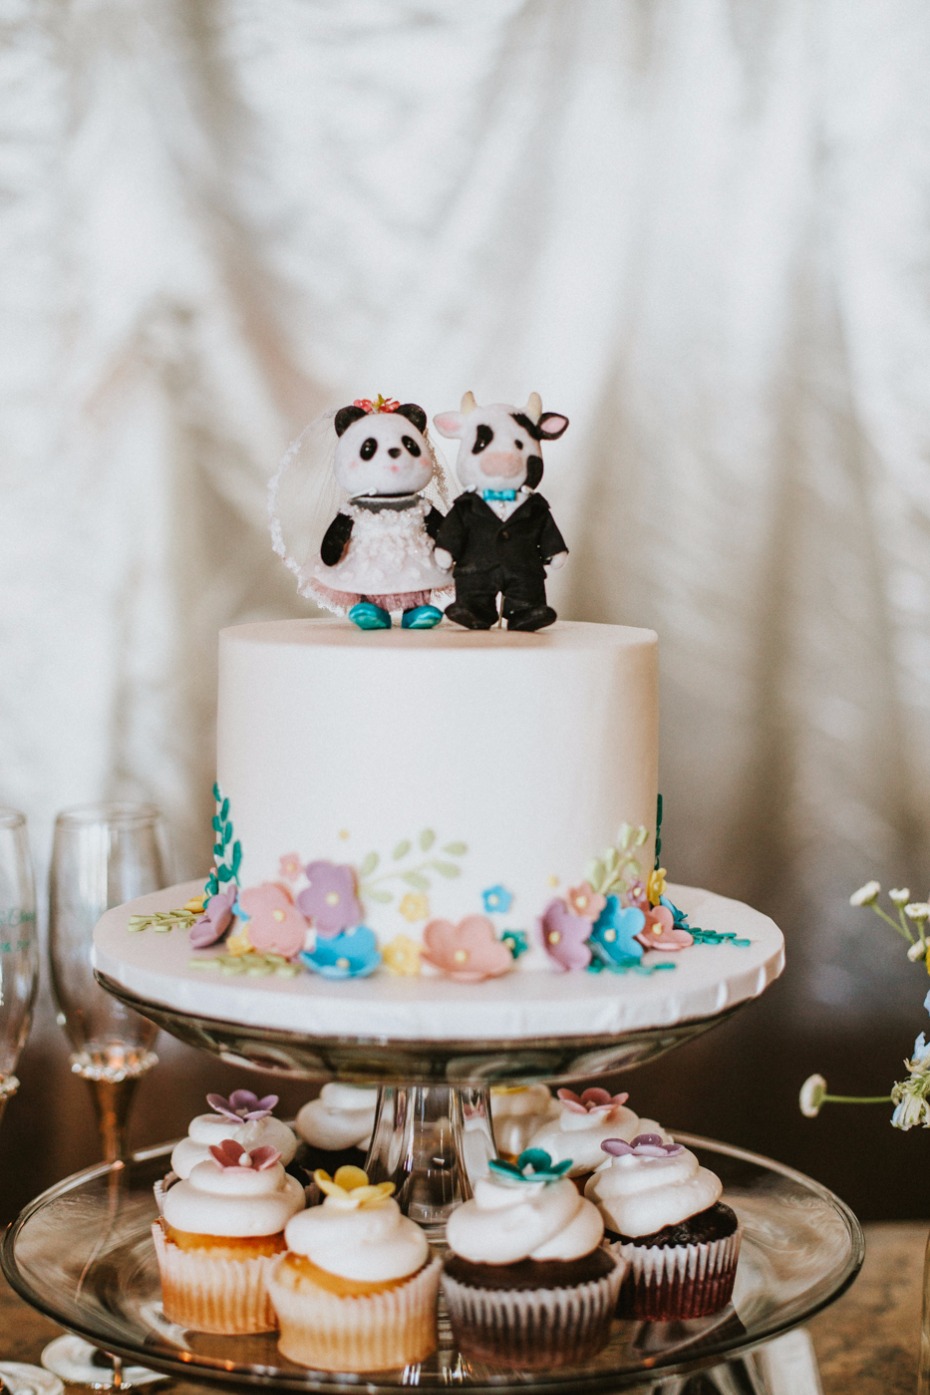 Panda and cow topper